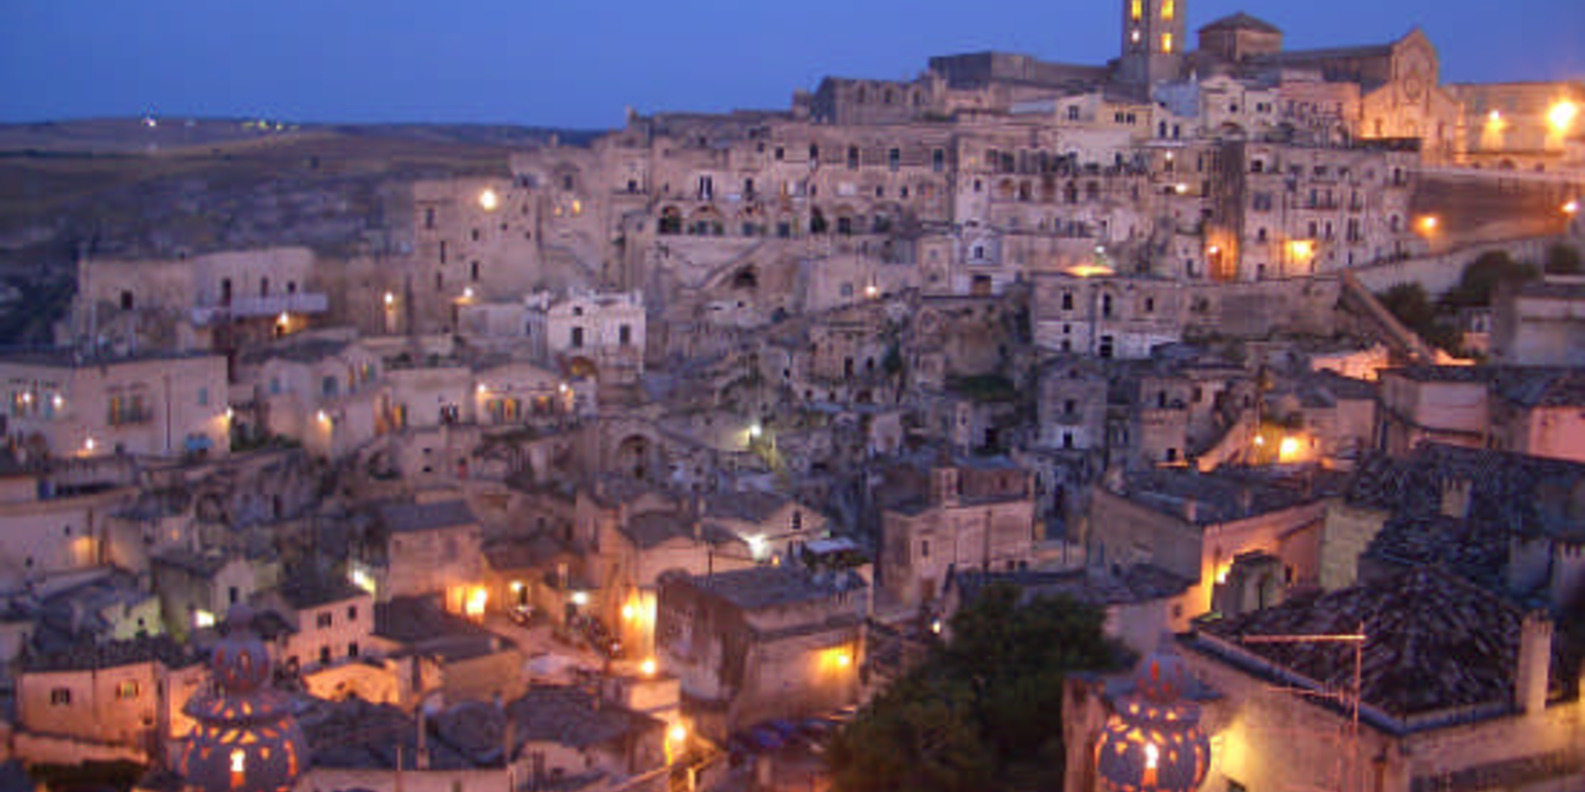 things to do in Ostuni